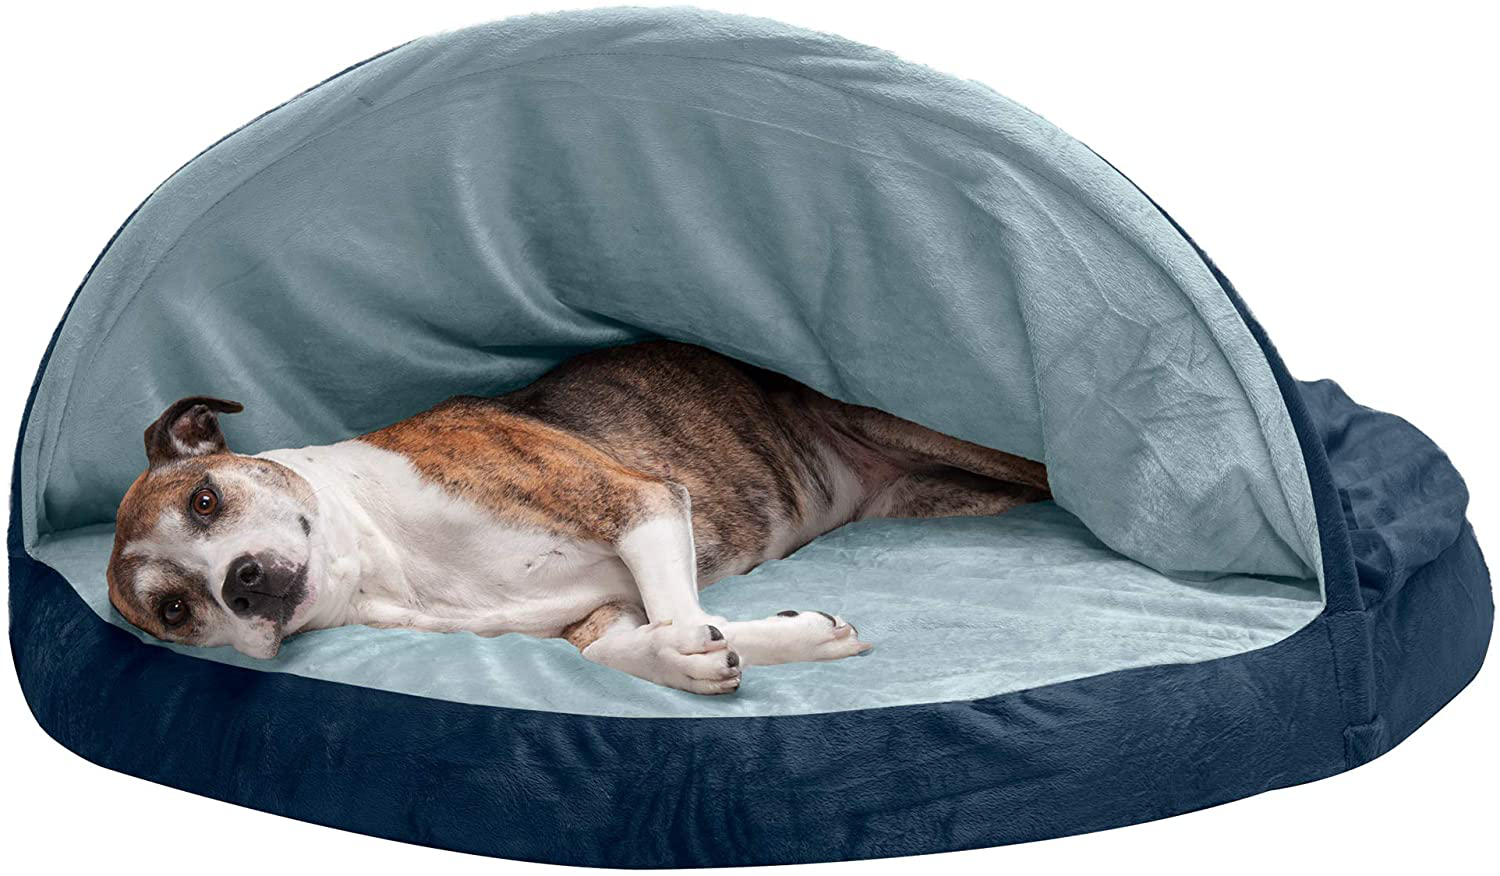 Furhaven Cozy Pet Beds for Small, Medium, and Large Dogs and Cats - Snuggery Hooded Burrowing Cave Tent, Deep Dish Cushion Donut Dog Bed with Attached Blanket, and More Animals & Pet Supplies > Pet Supplies > Cat Supplies > Cat Beds Furhaven Microvelvet Navy Snuggery (Cooling Gel Foam) 44 inch